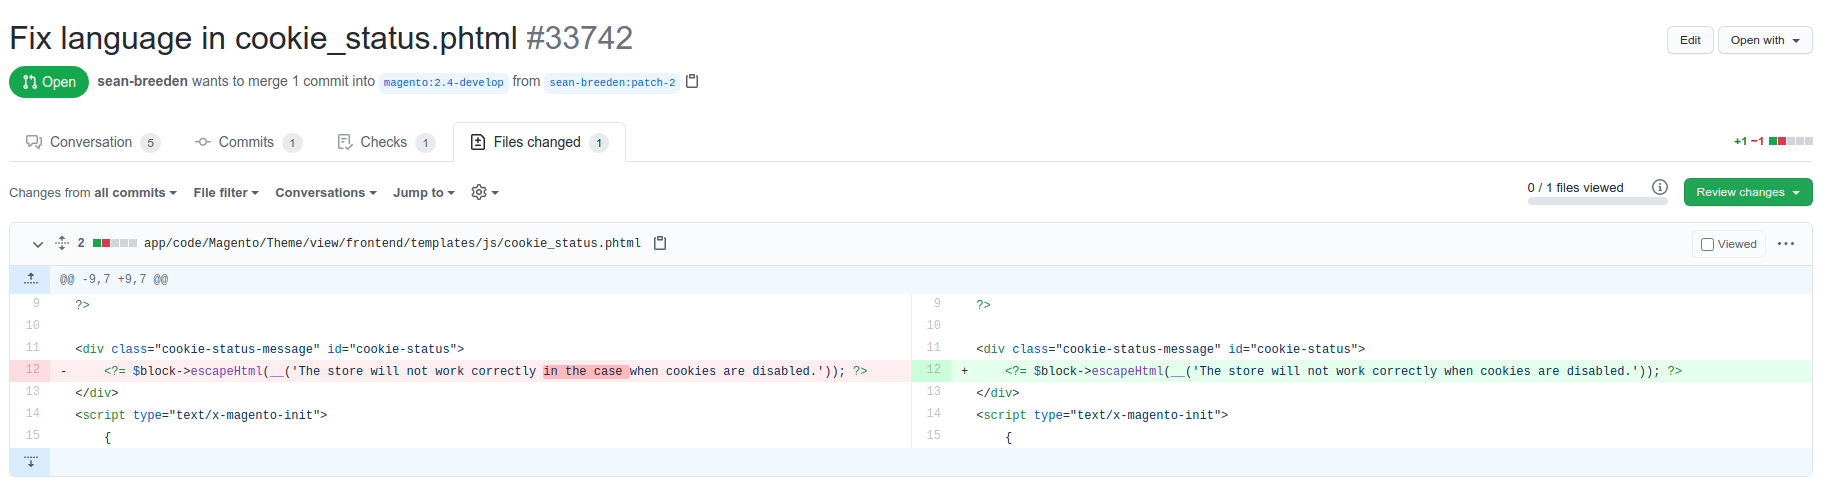 Github PR showing my latest core contribution